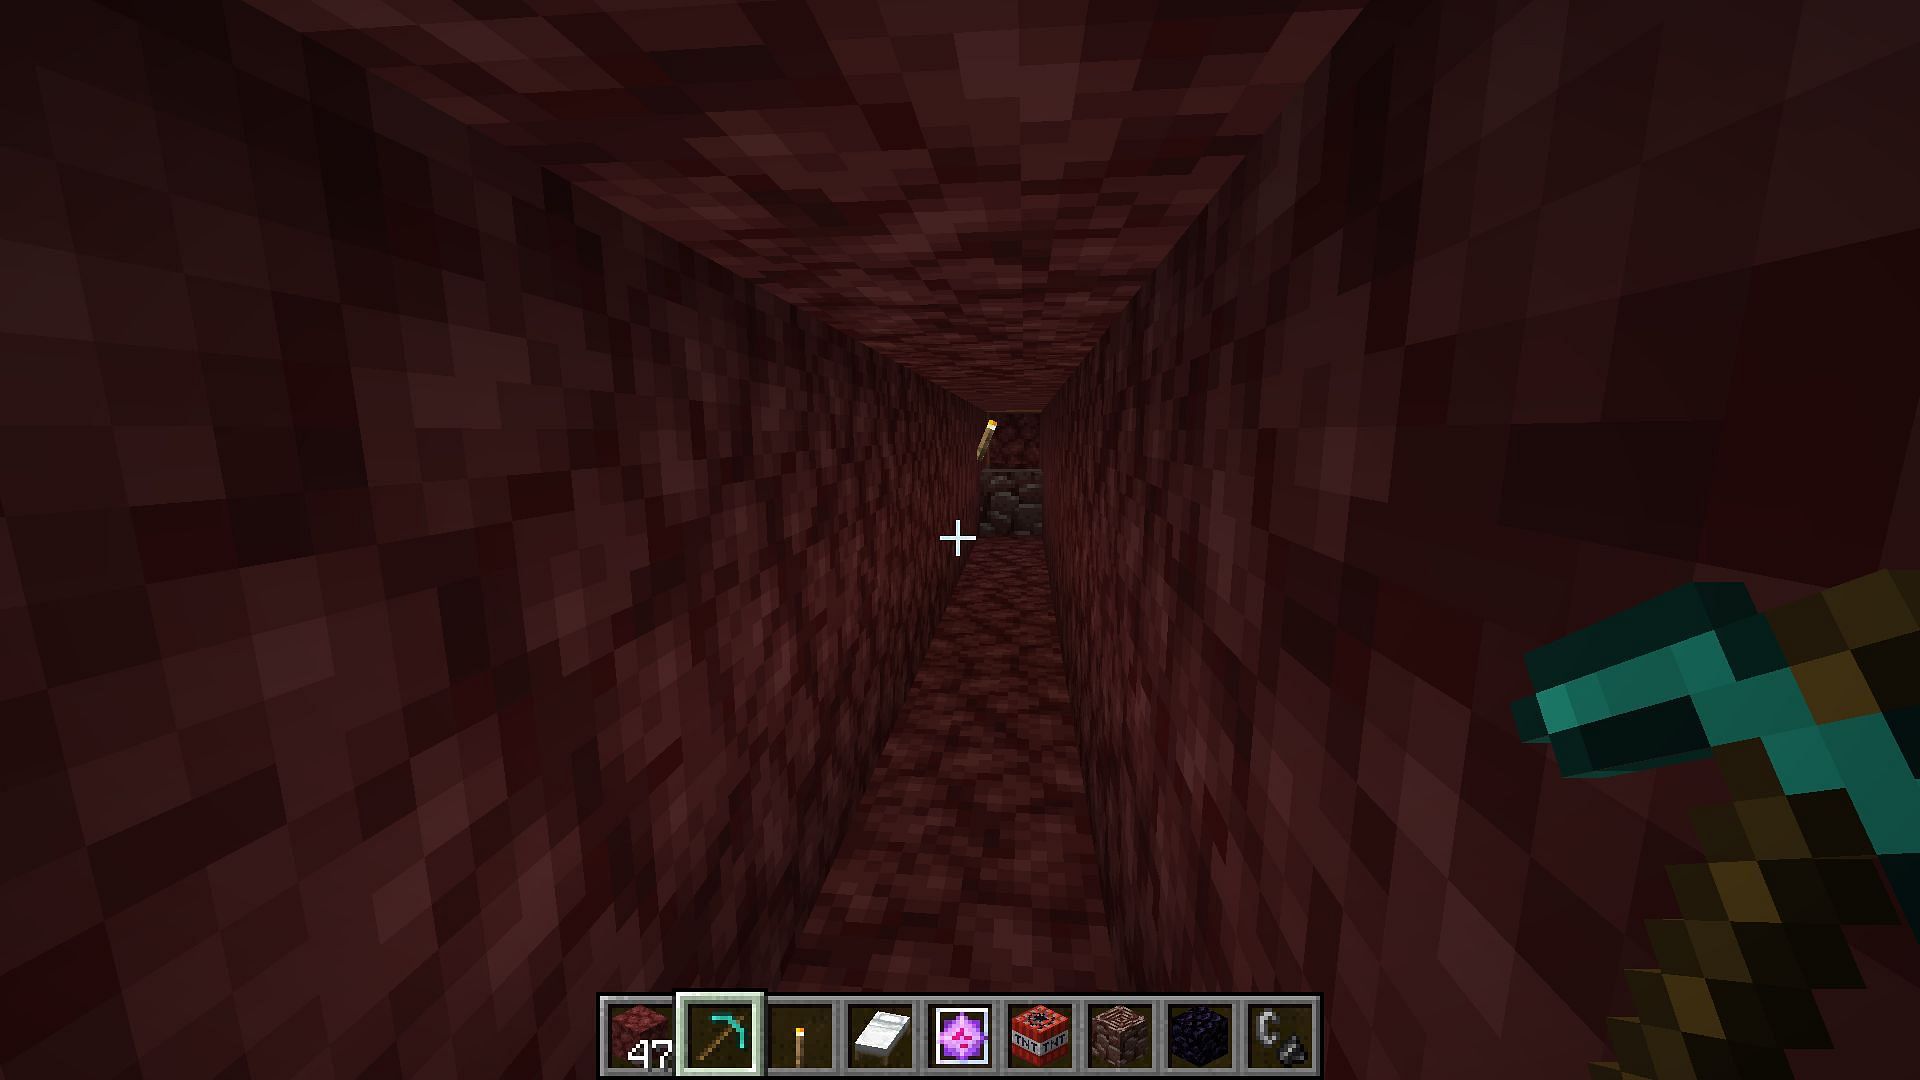 Players can strip mine at Y level 15 in the Nether realm to find Ancient Debris in Minecraft (Image via Mojang)